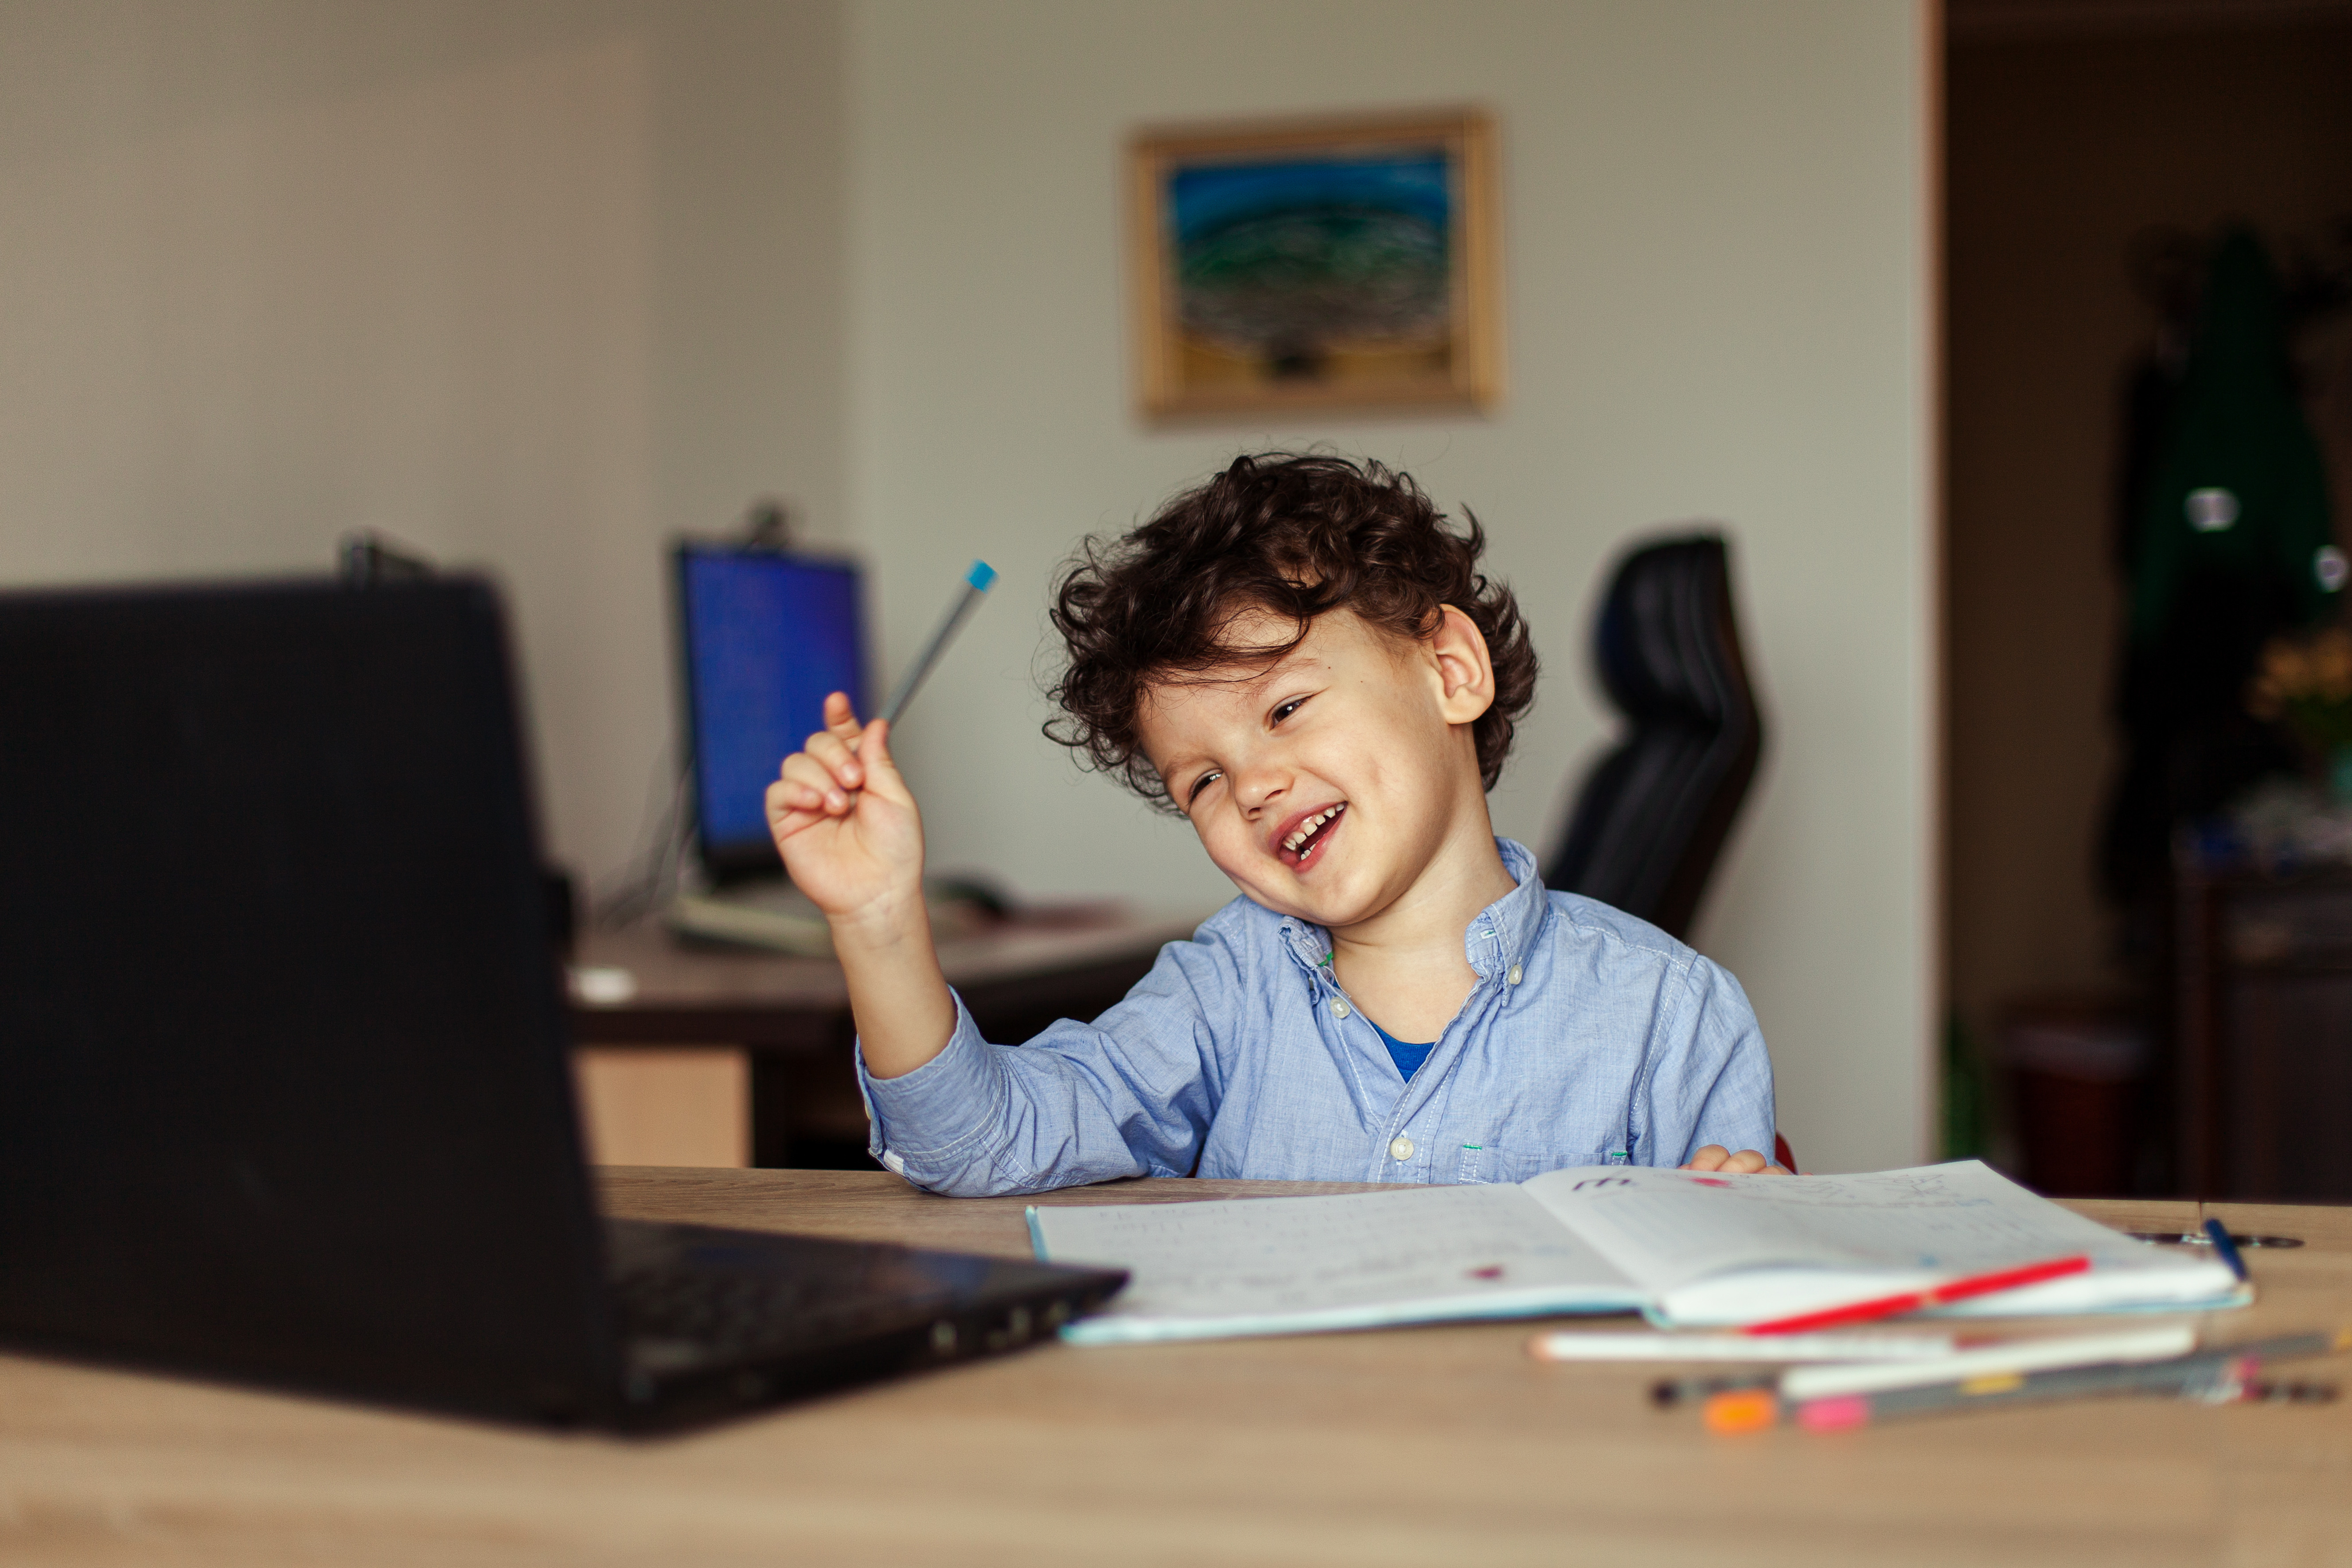 Young boy smiling at laptop